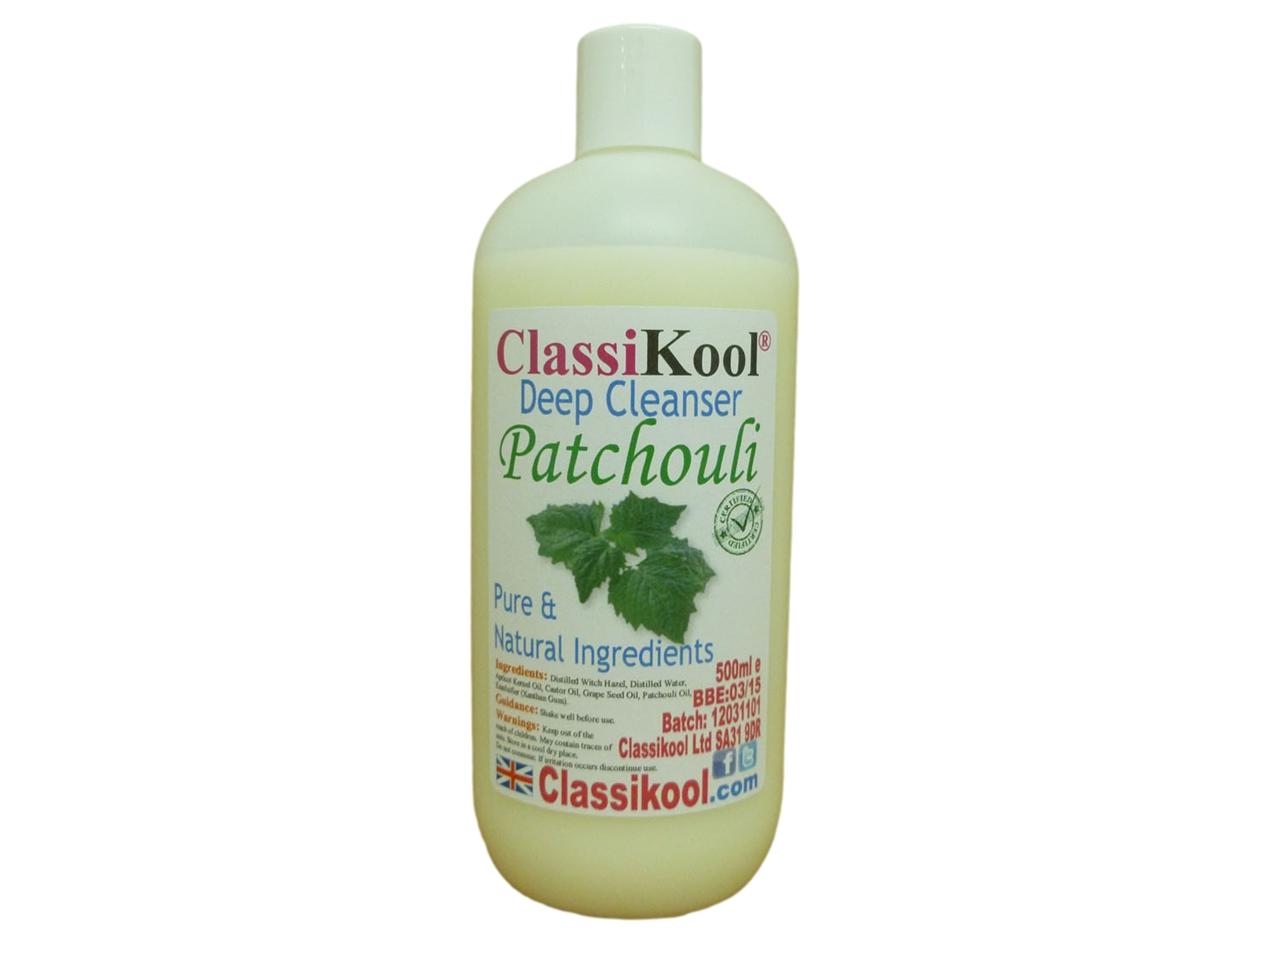 Classikool Natural Face Cleanser: A Gentle Pore Cleansing Liquid ...
